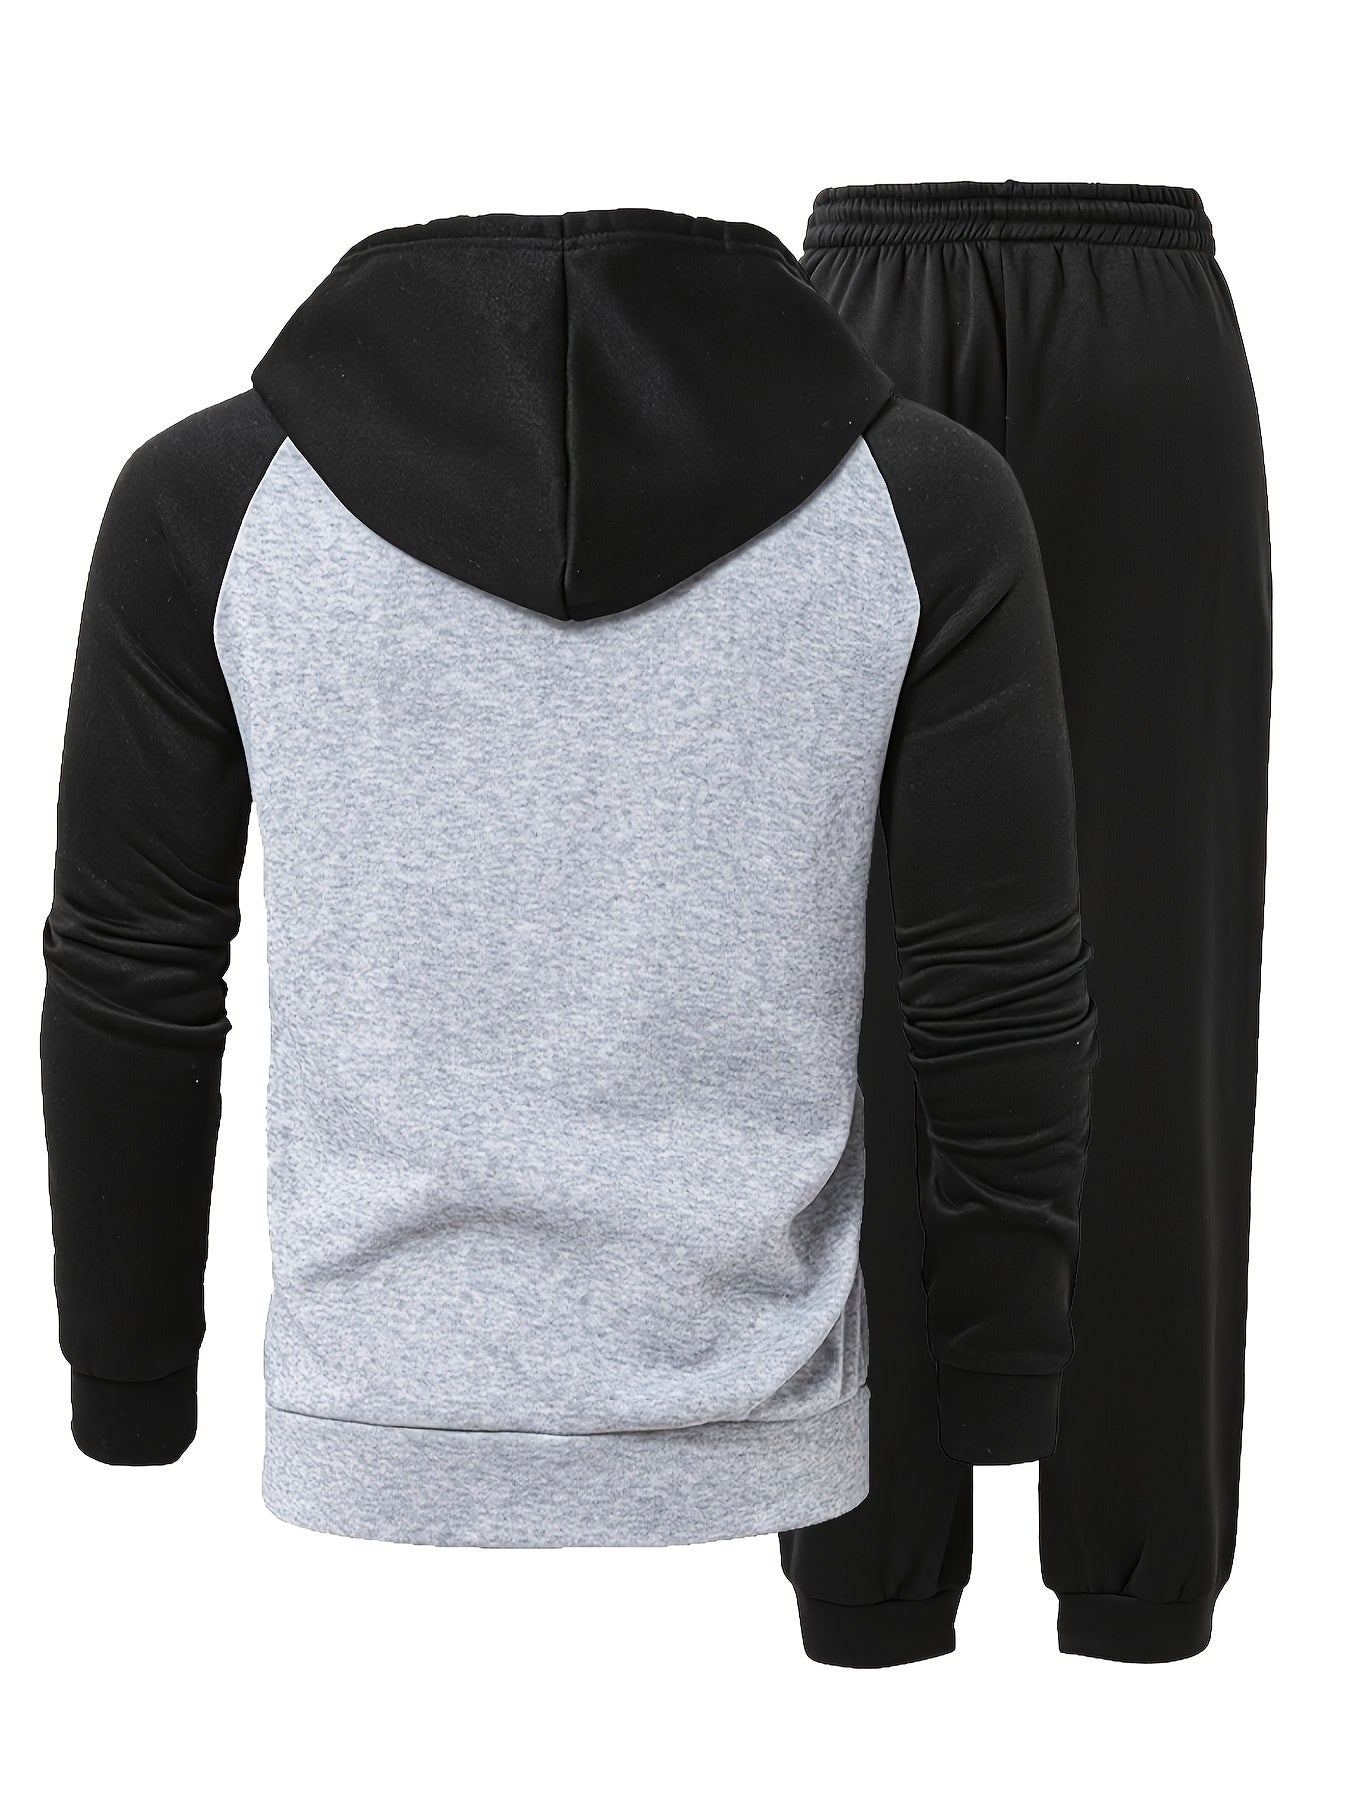 Classic Men's Athletic 2 Piece Tracksuit Set Casual Full-Zip Sweatsuits Long Sleeve Hoodie And Jogging Pants Set For Gym Workout Running